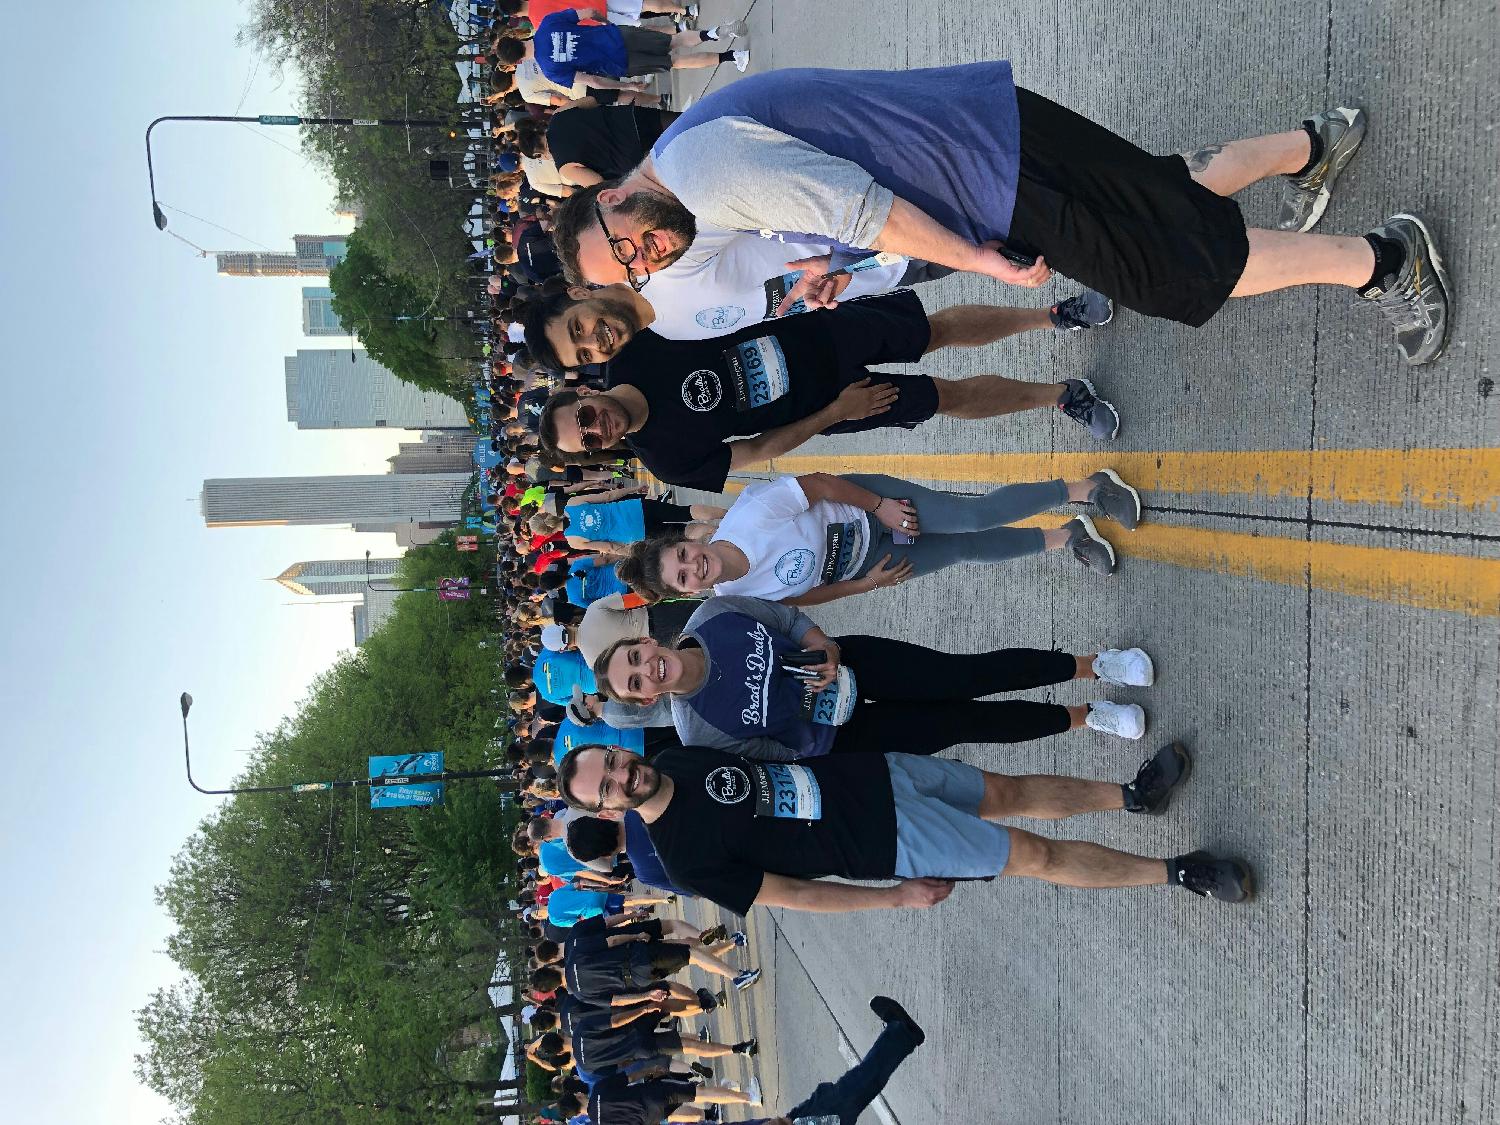 Running the JP Morgan Chase Corporate Challenge